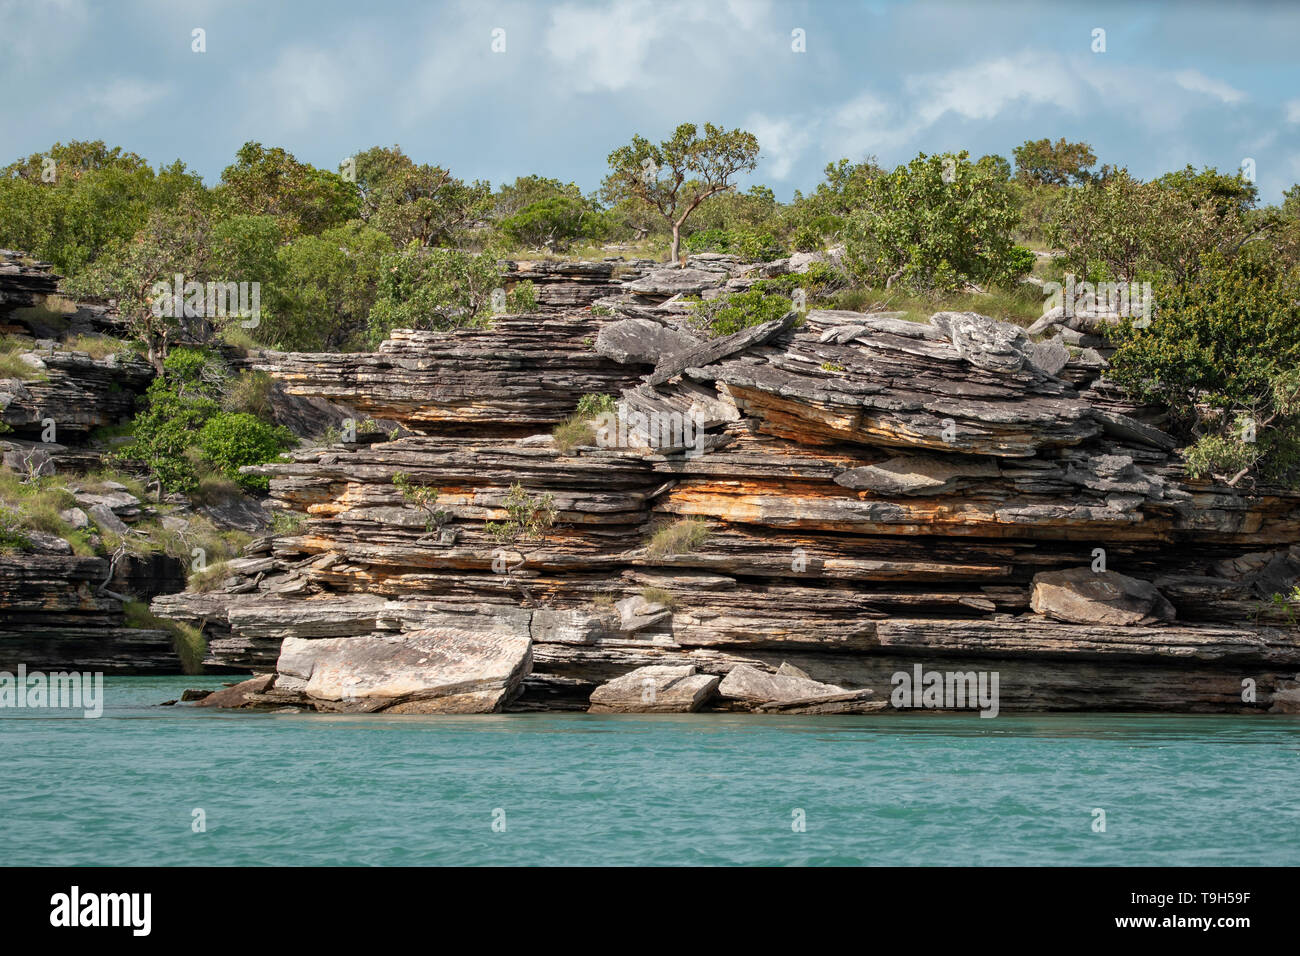 Layered Rocks at Hole in the Wall, NT Stock Photo